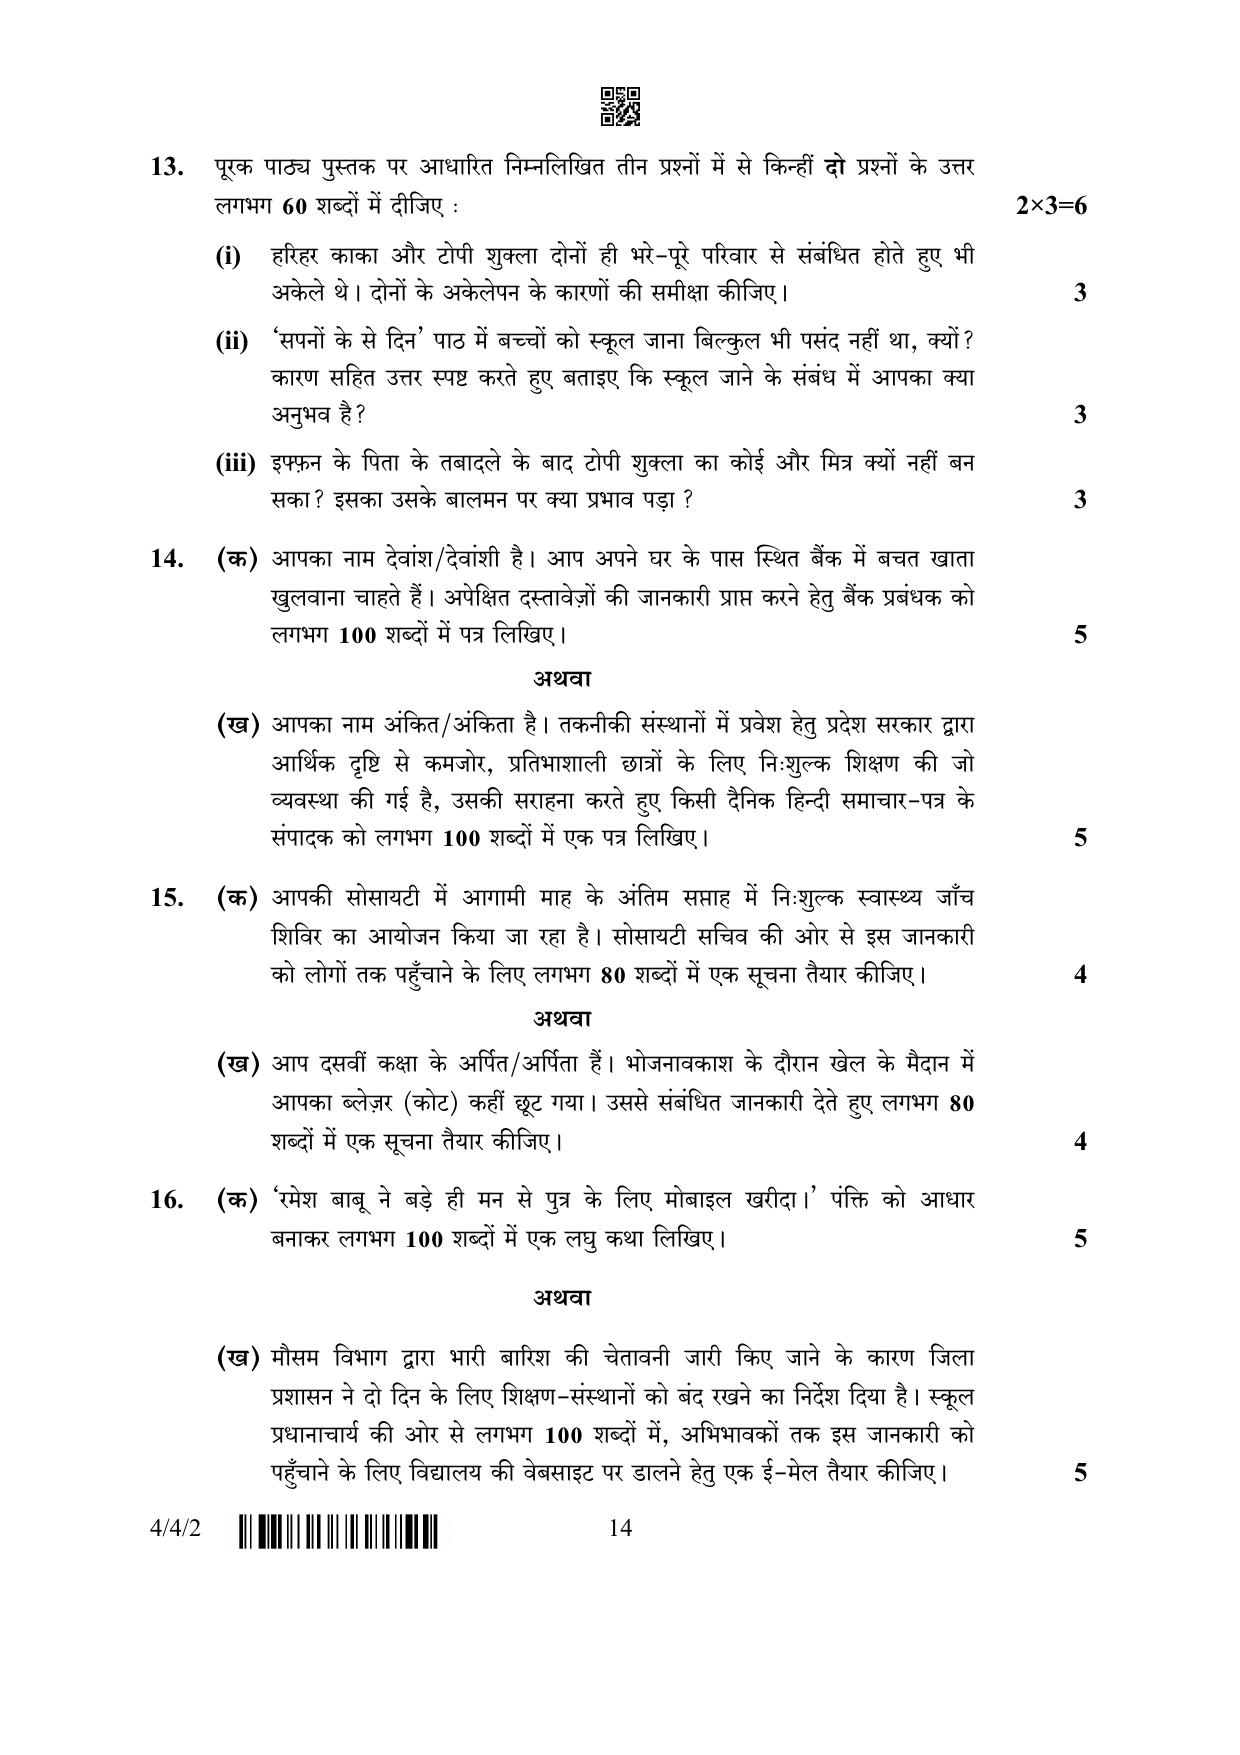 CBSE Class 10 4-4-2 Hindi B 2023 Question Paper - Page 14